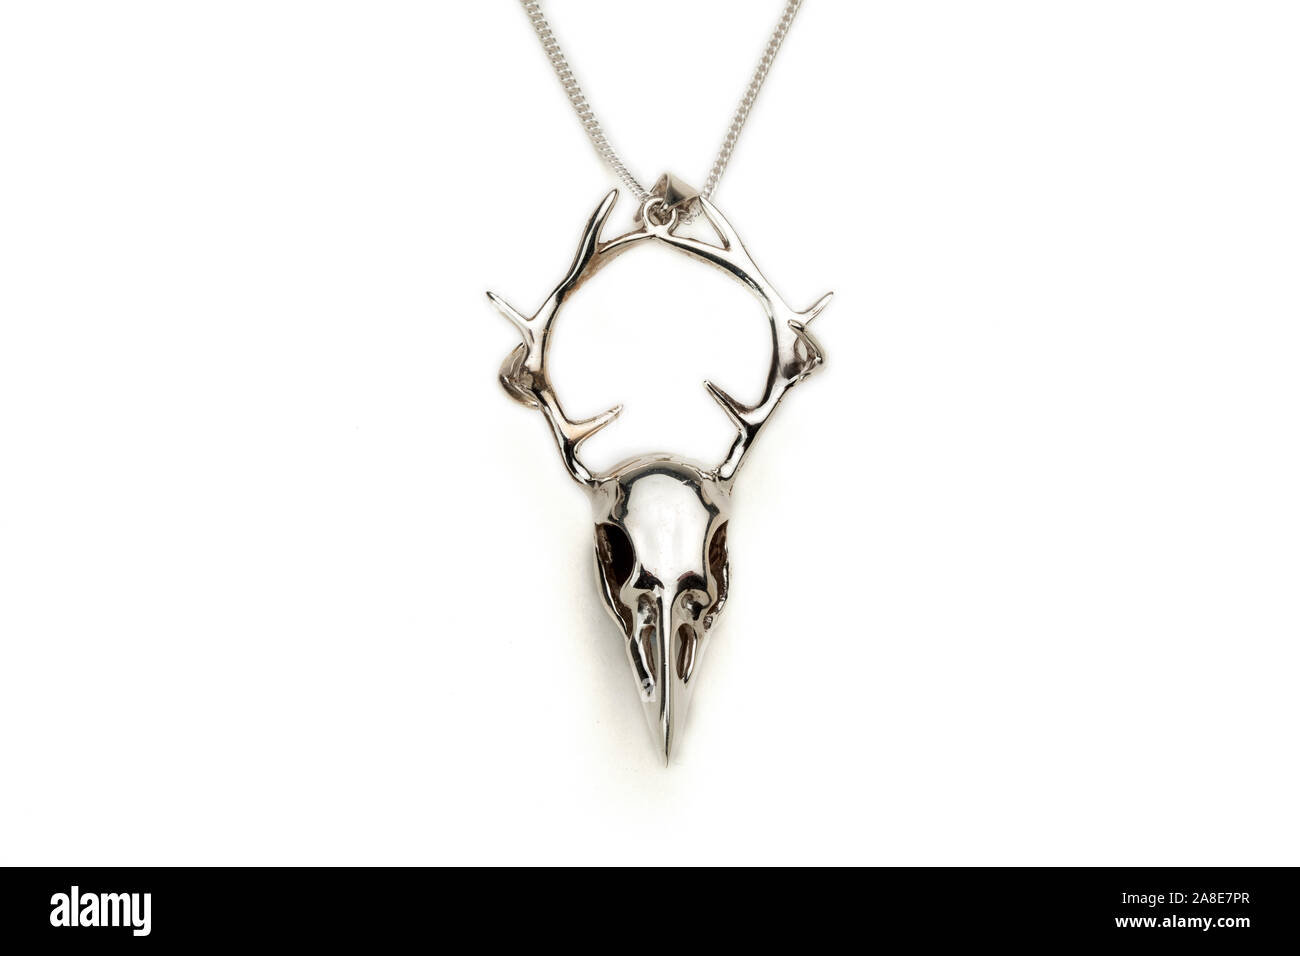 Silver crow skull and stag antlers necklace pendant. Stock Photo